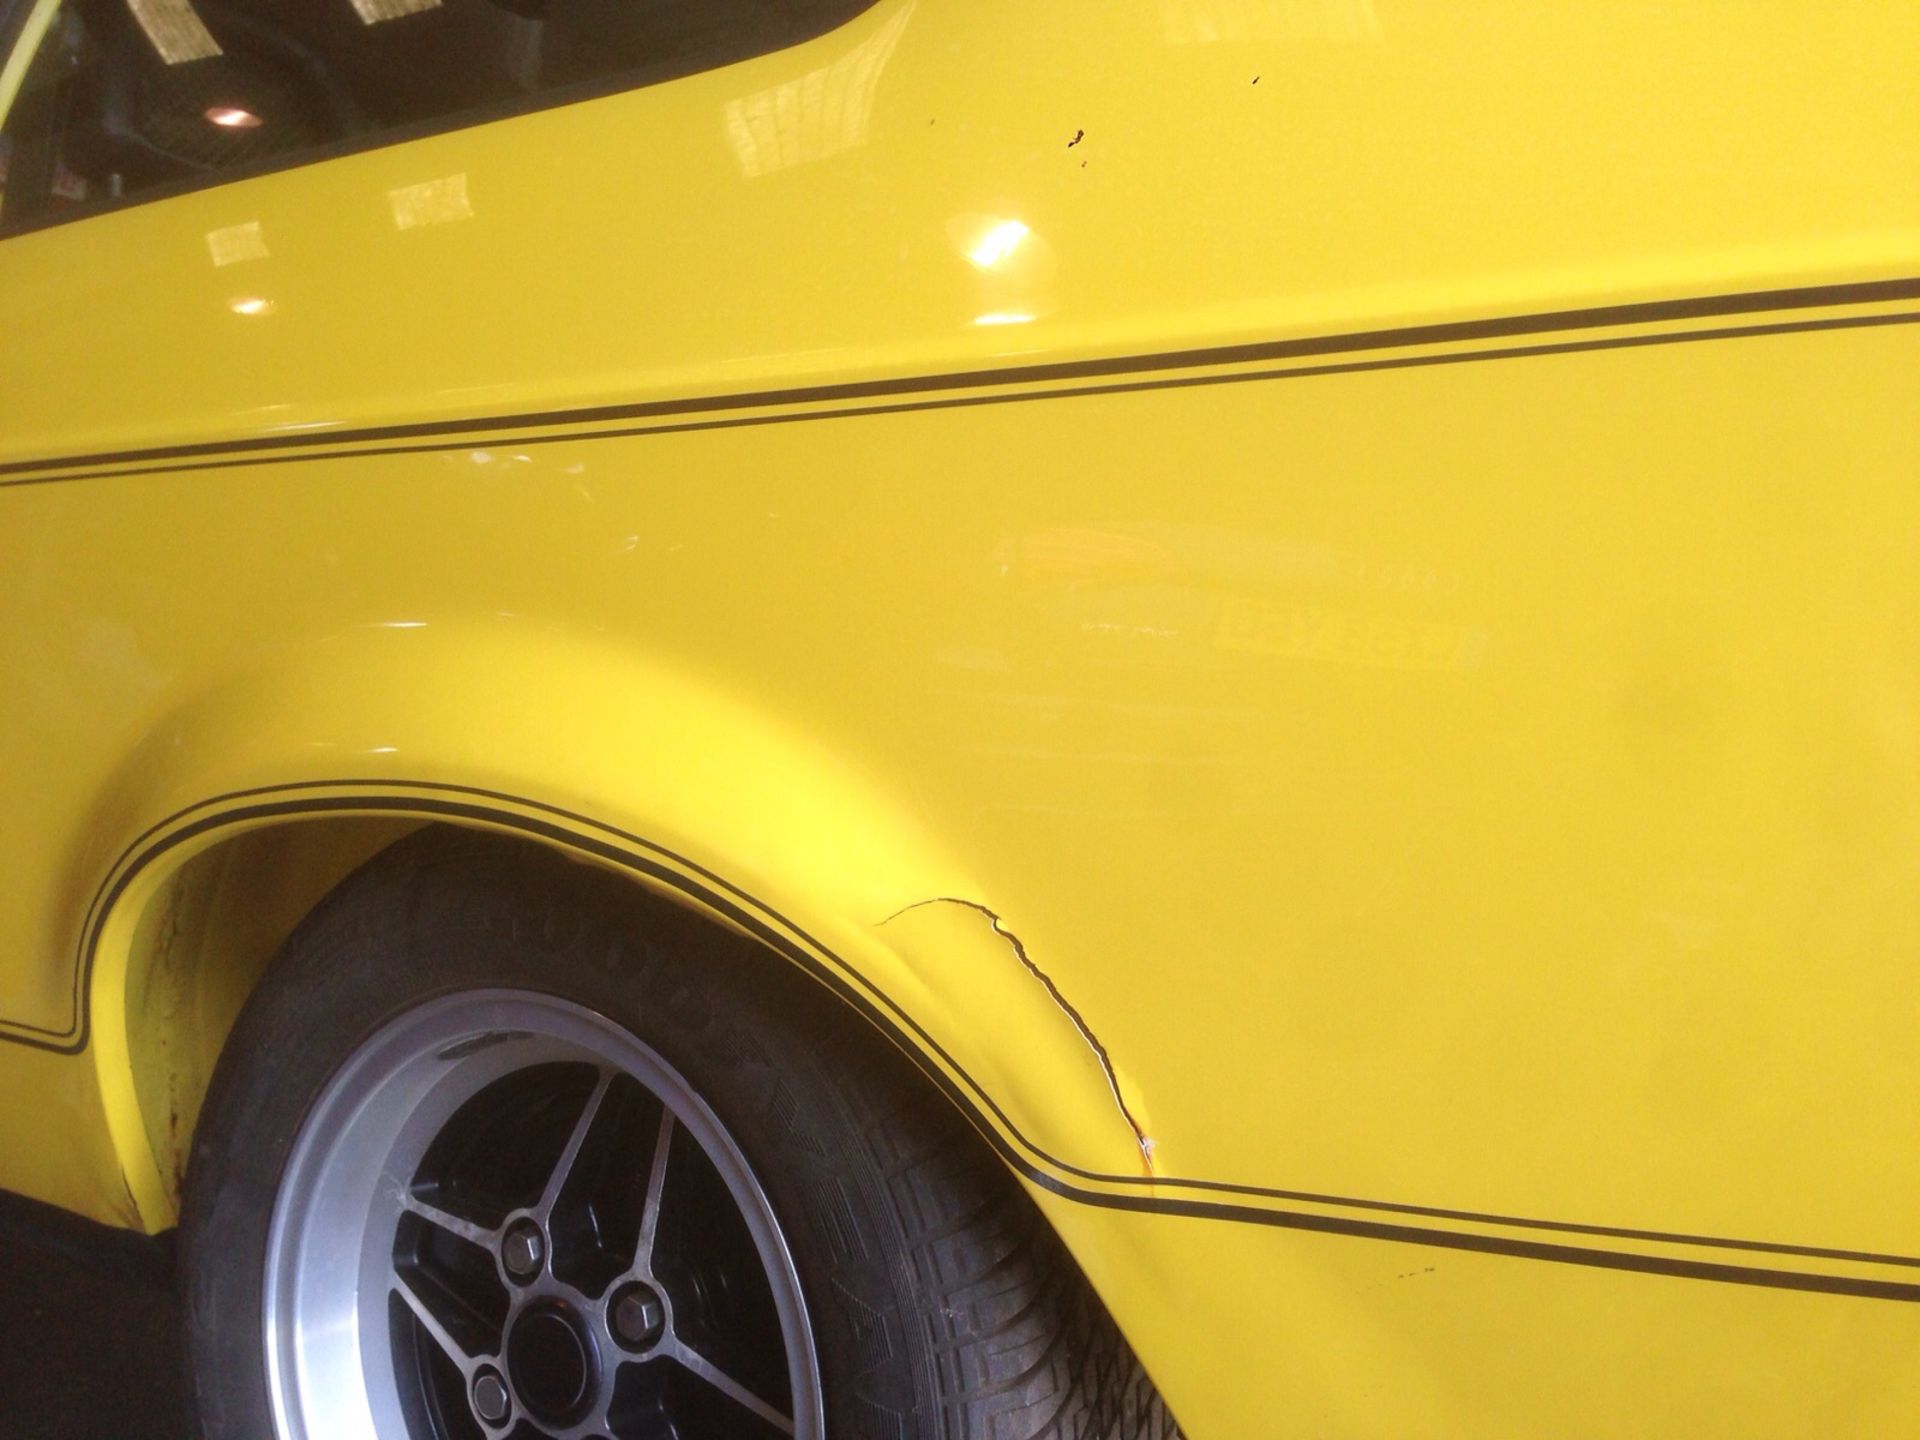 1979/T Ford Escort mk2 1600 Sport - in Signal yellow -  UK car  (545 miles) since rebuild - Image 21 of 54